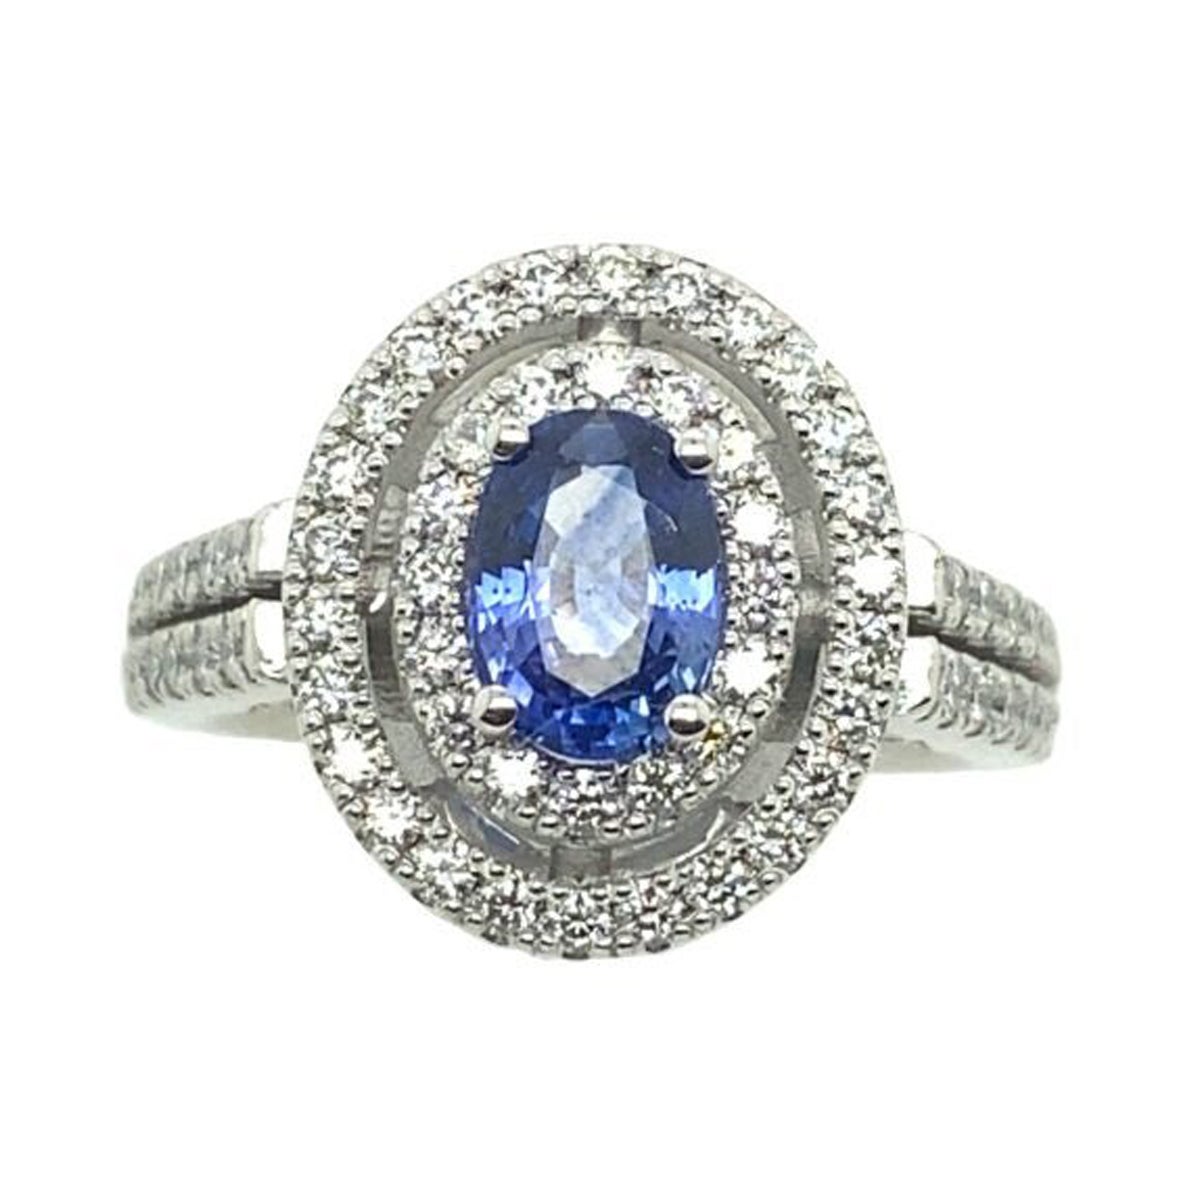 1.04ct Certified Natural Ceylon Sapphire Ring Surrounded by 0.87ct Diamonds For Sale